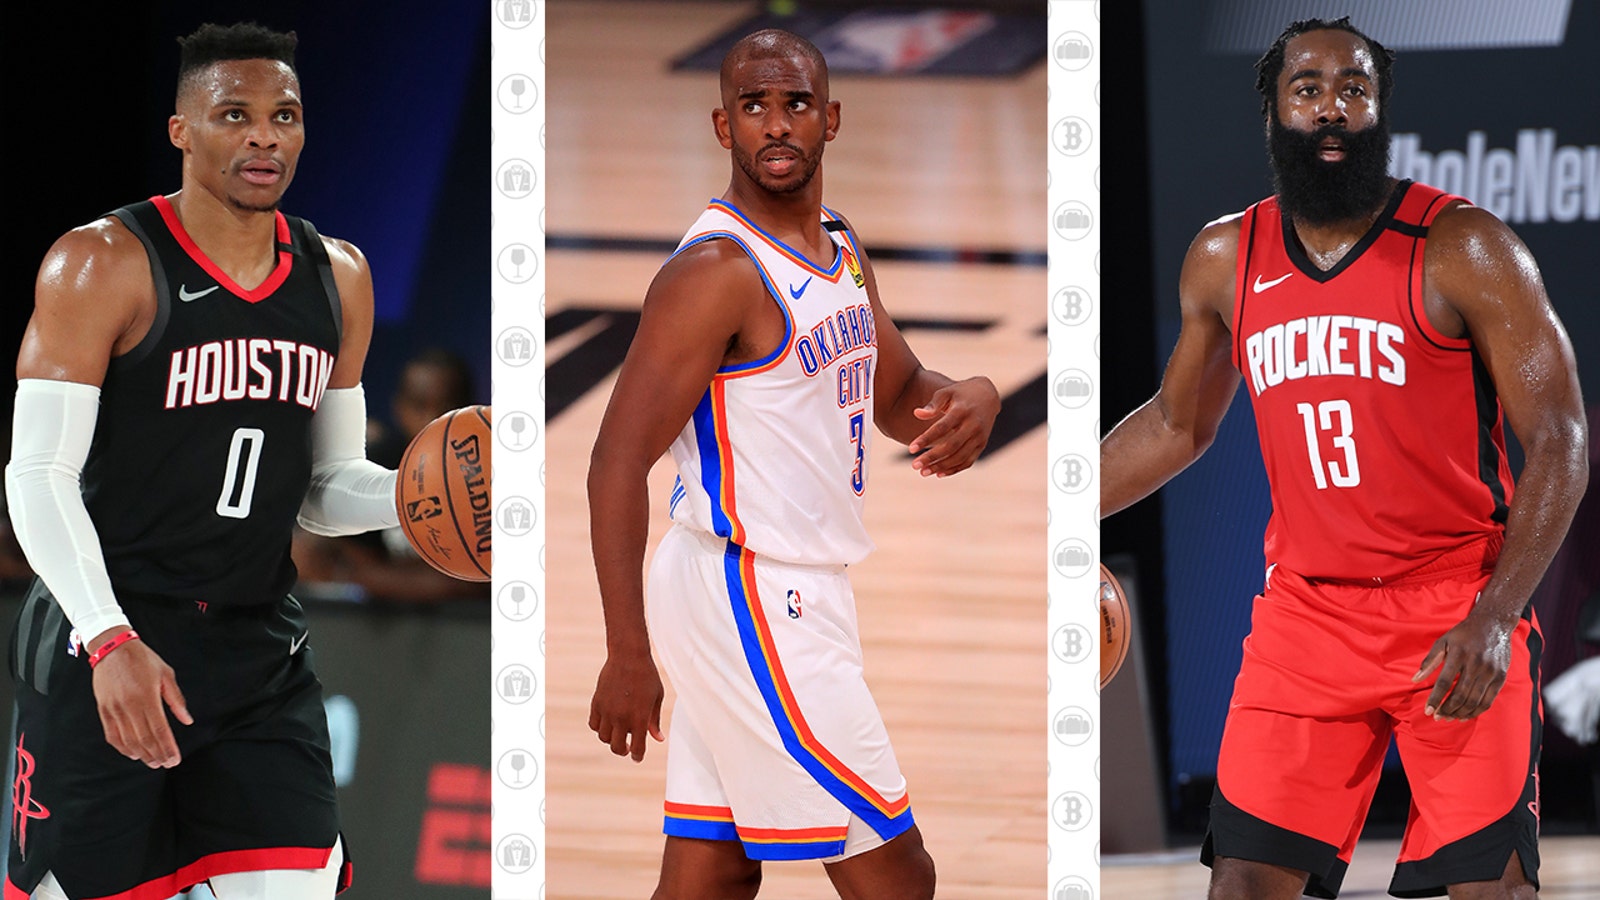 Russell Westbrook, James Harden, Chris Paul and the underlying rifts of Rockets vs Thunder